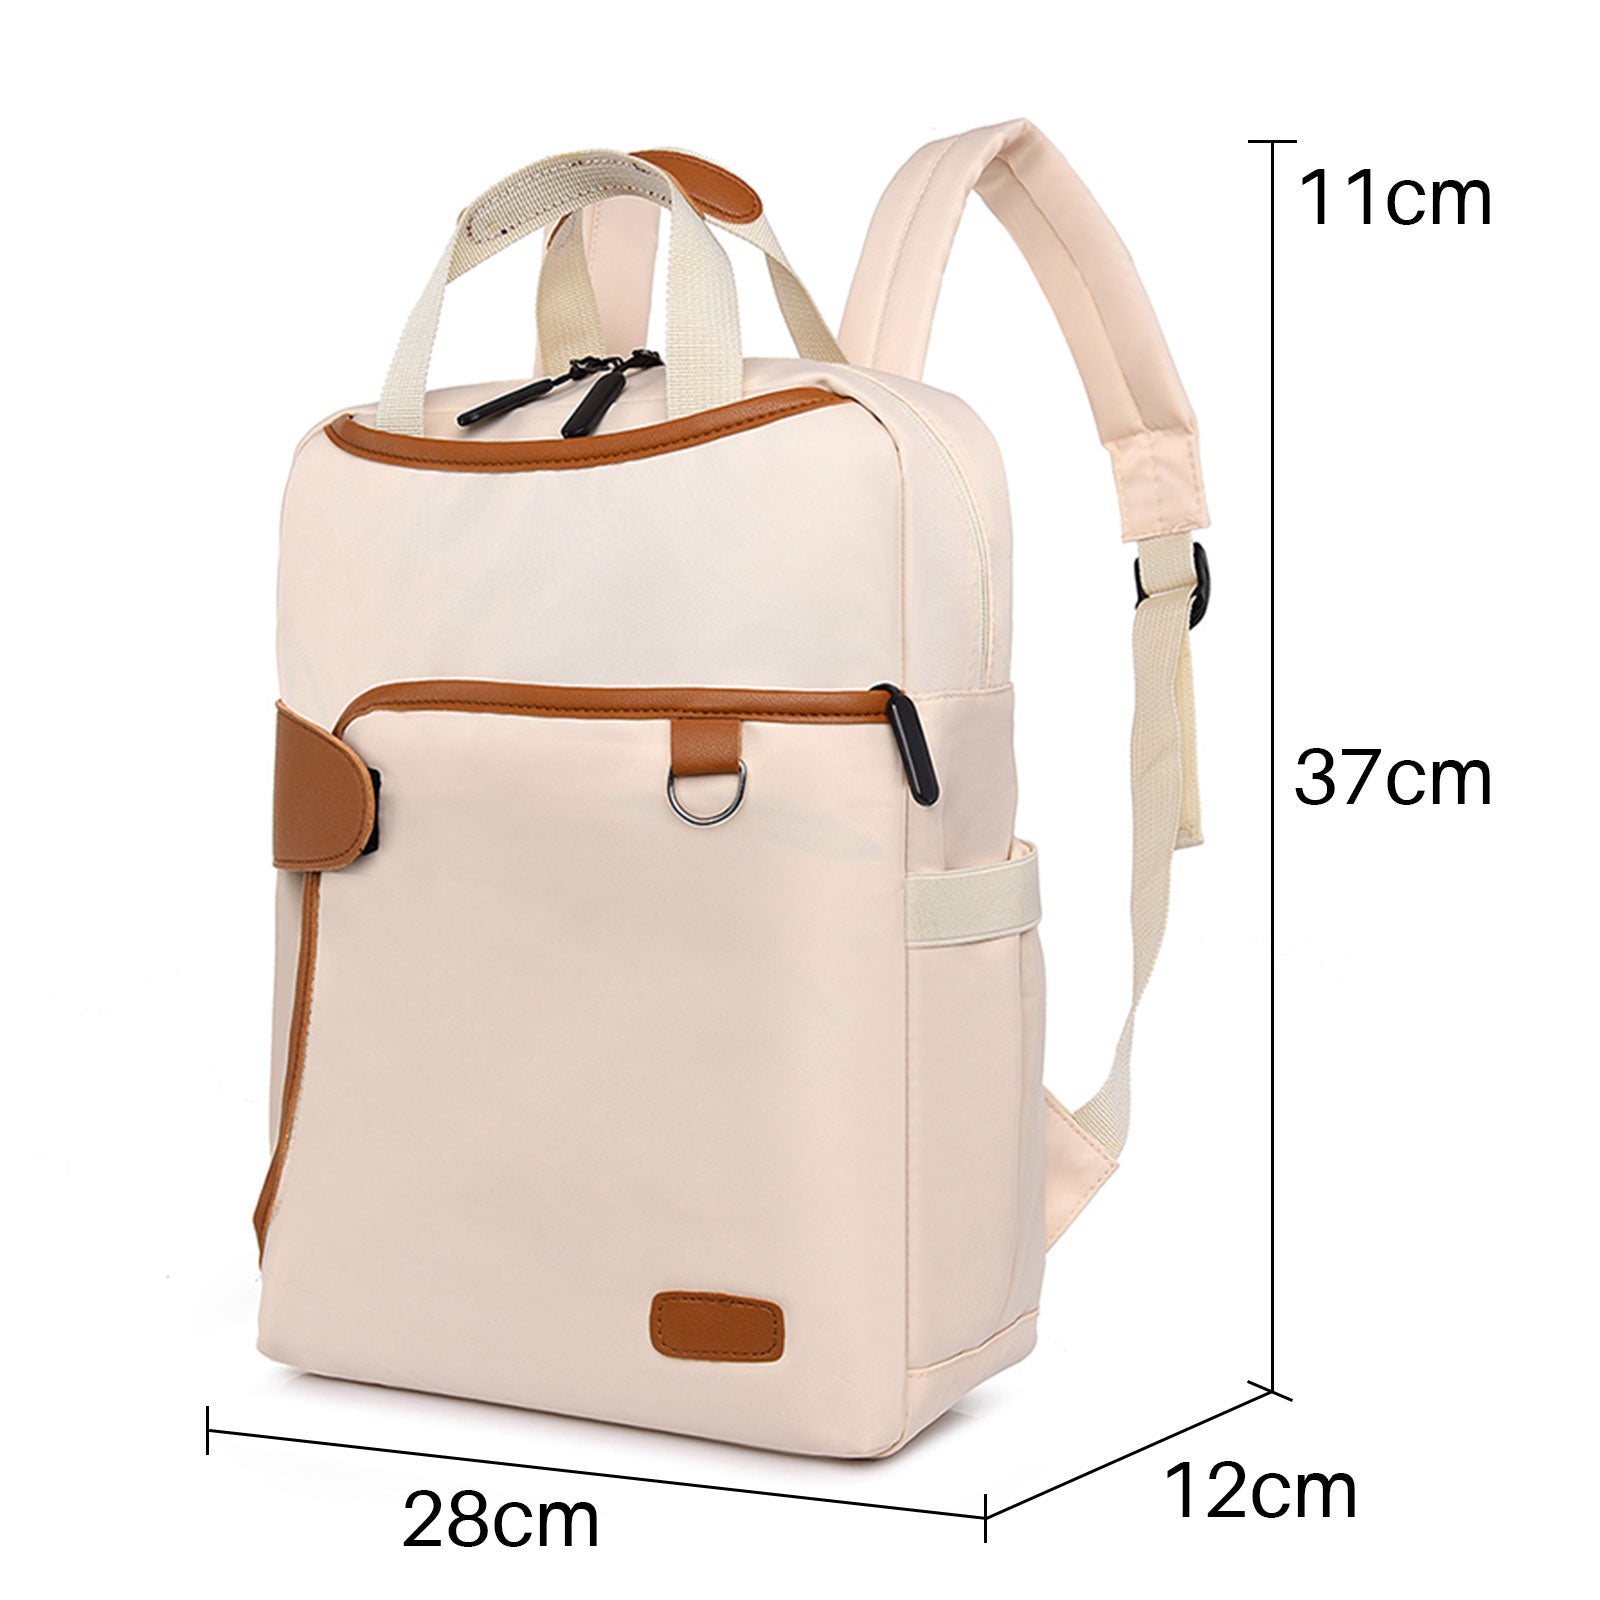 Waterproof Backpack Laptop Backpack Fashion Anti-theft Casual Backpacks Lightweight Travel Shoulder Bag for Work Outdoor Leisure School